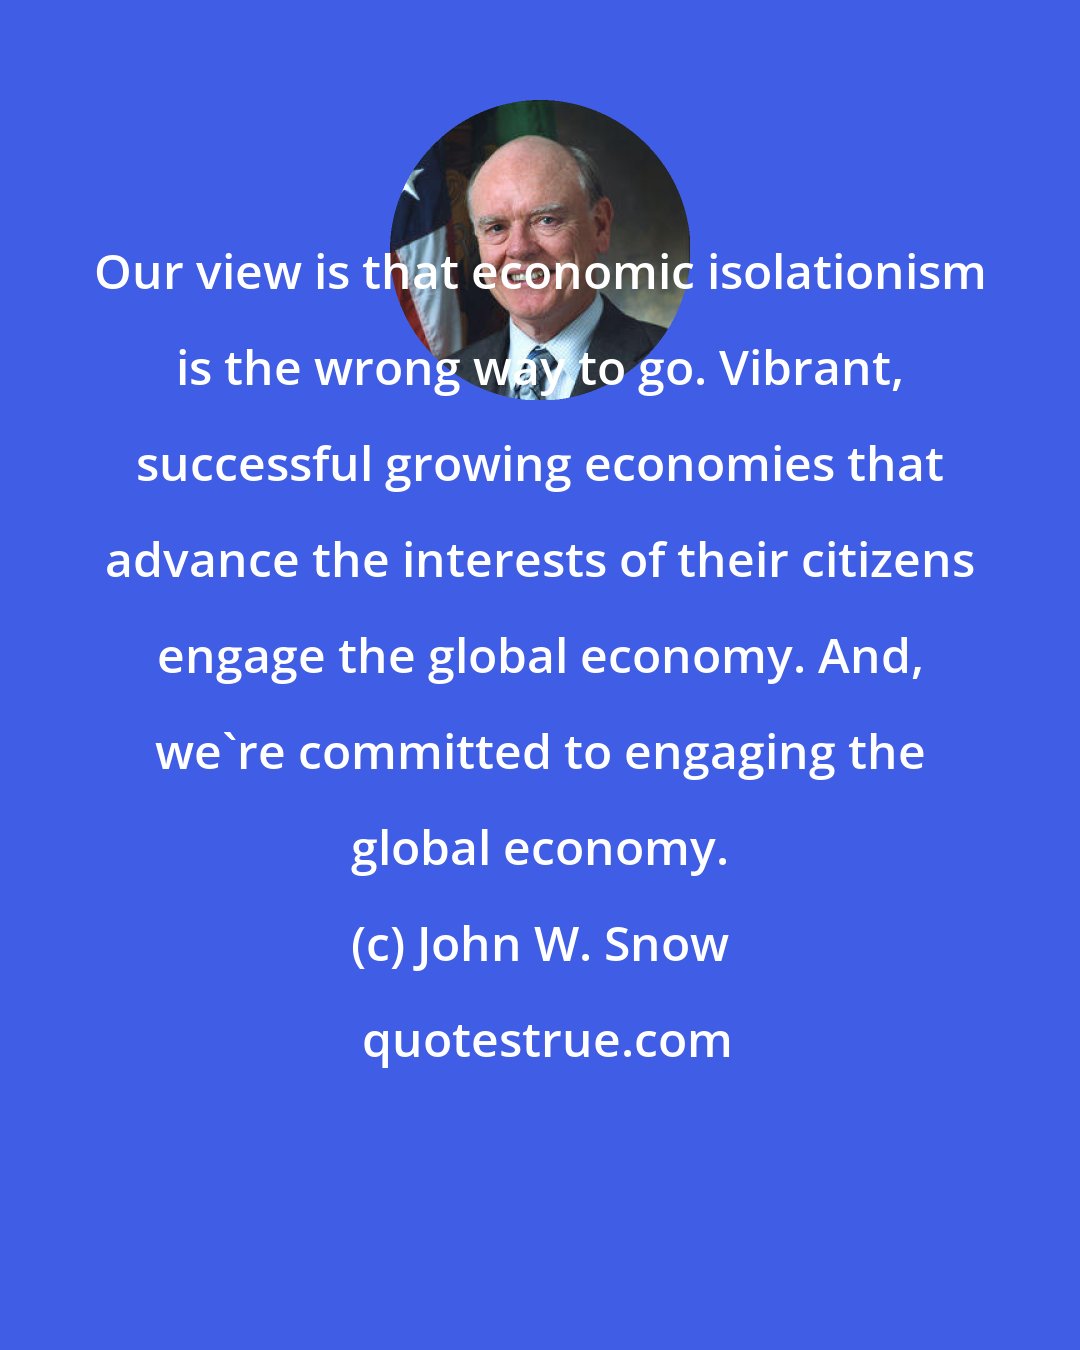 John W. Snow: Our view is that economic isolationism is the wrong way to go. Vibrant, successful growing economies that advance the interests of their citizens engage the global economy. And, we're committed to engaging the global economy.